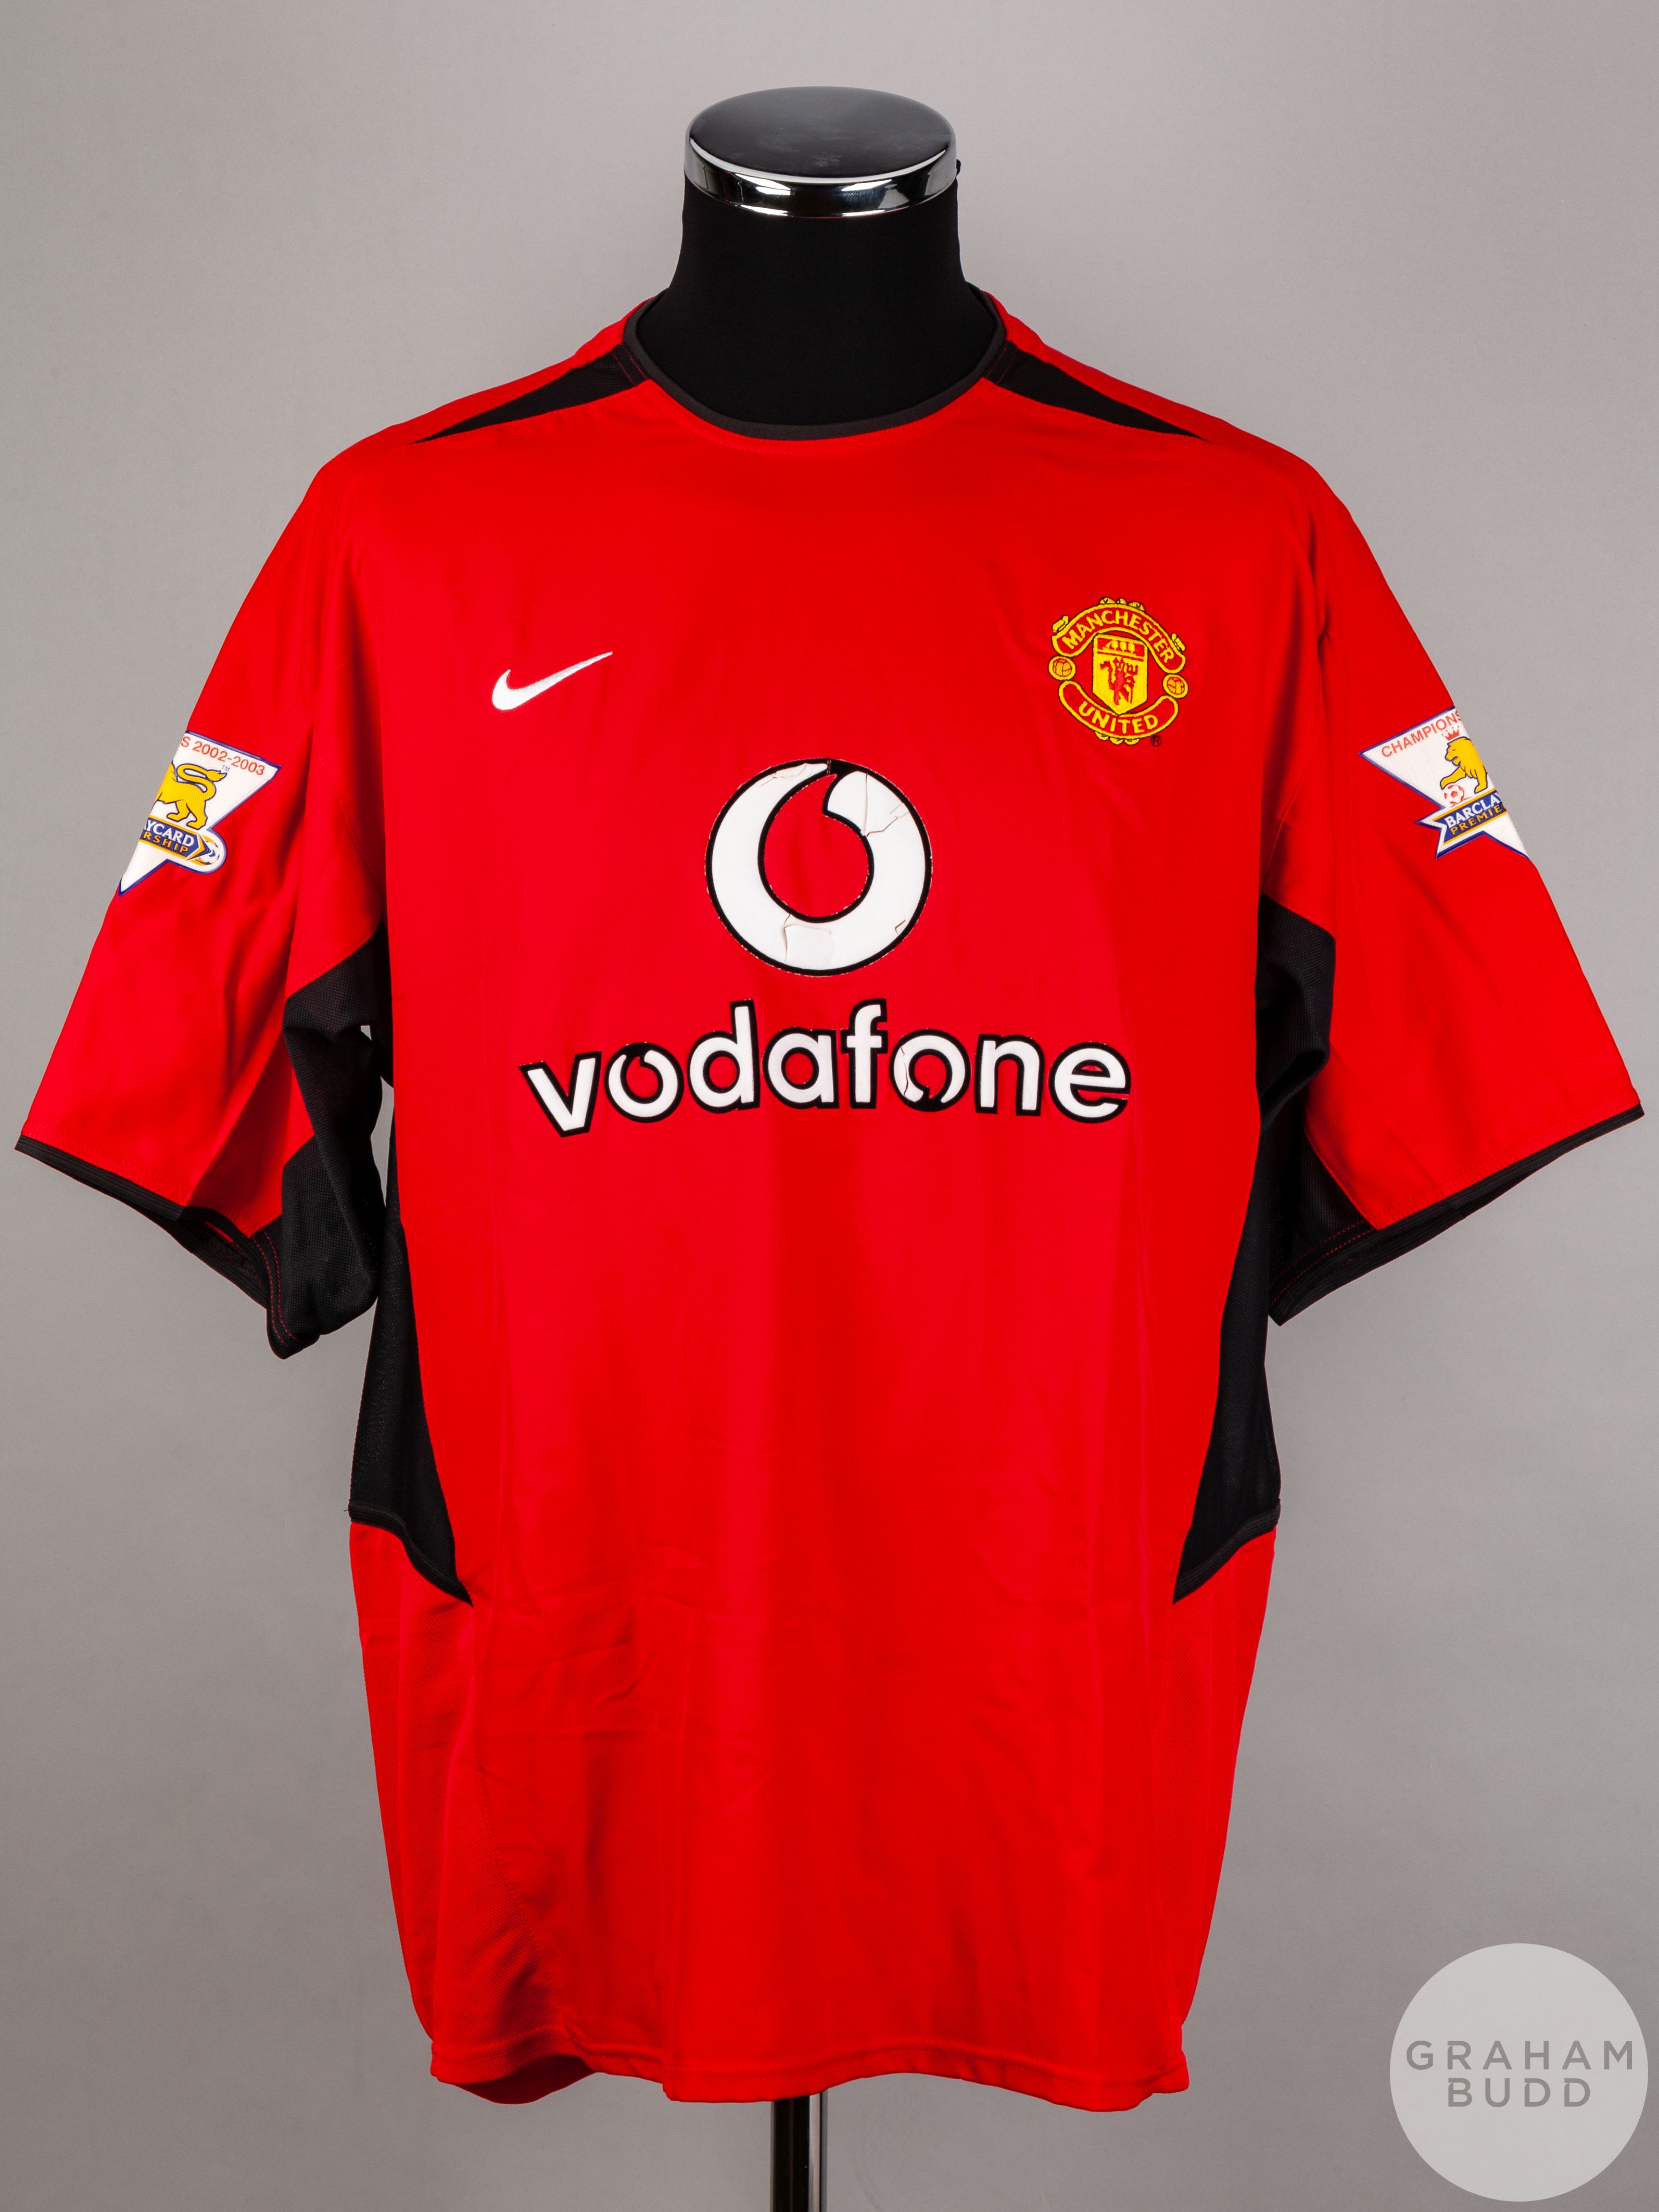 Roy Keane signed red Manchester United No.16 home shirt, season 2003-04,